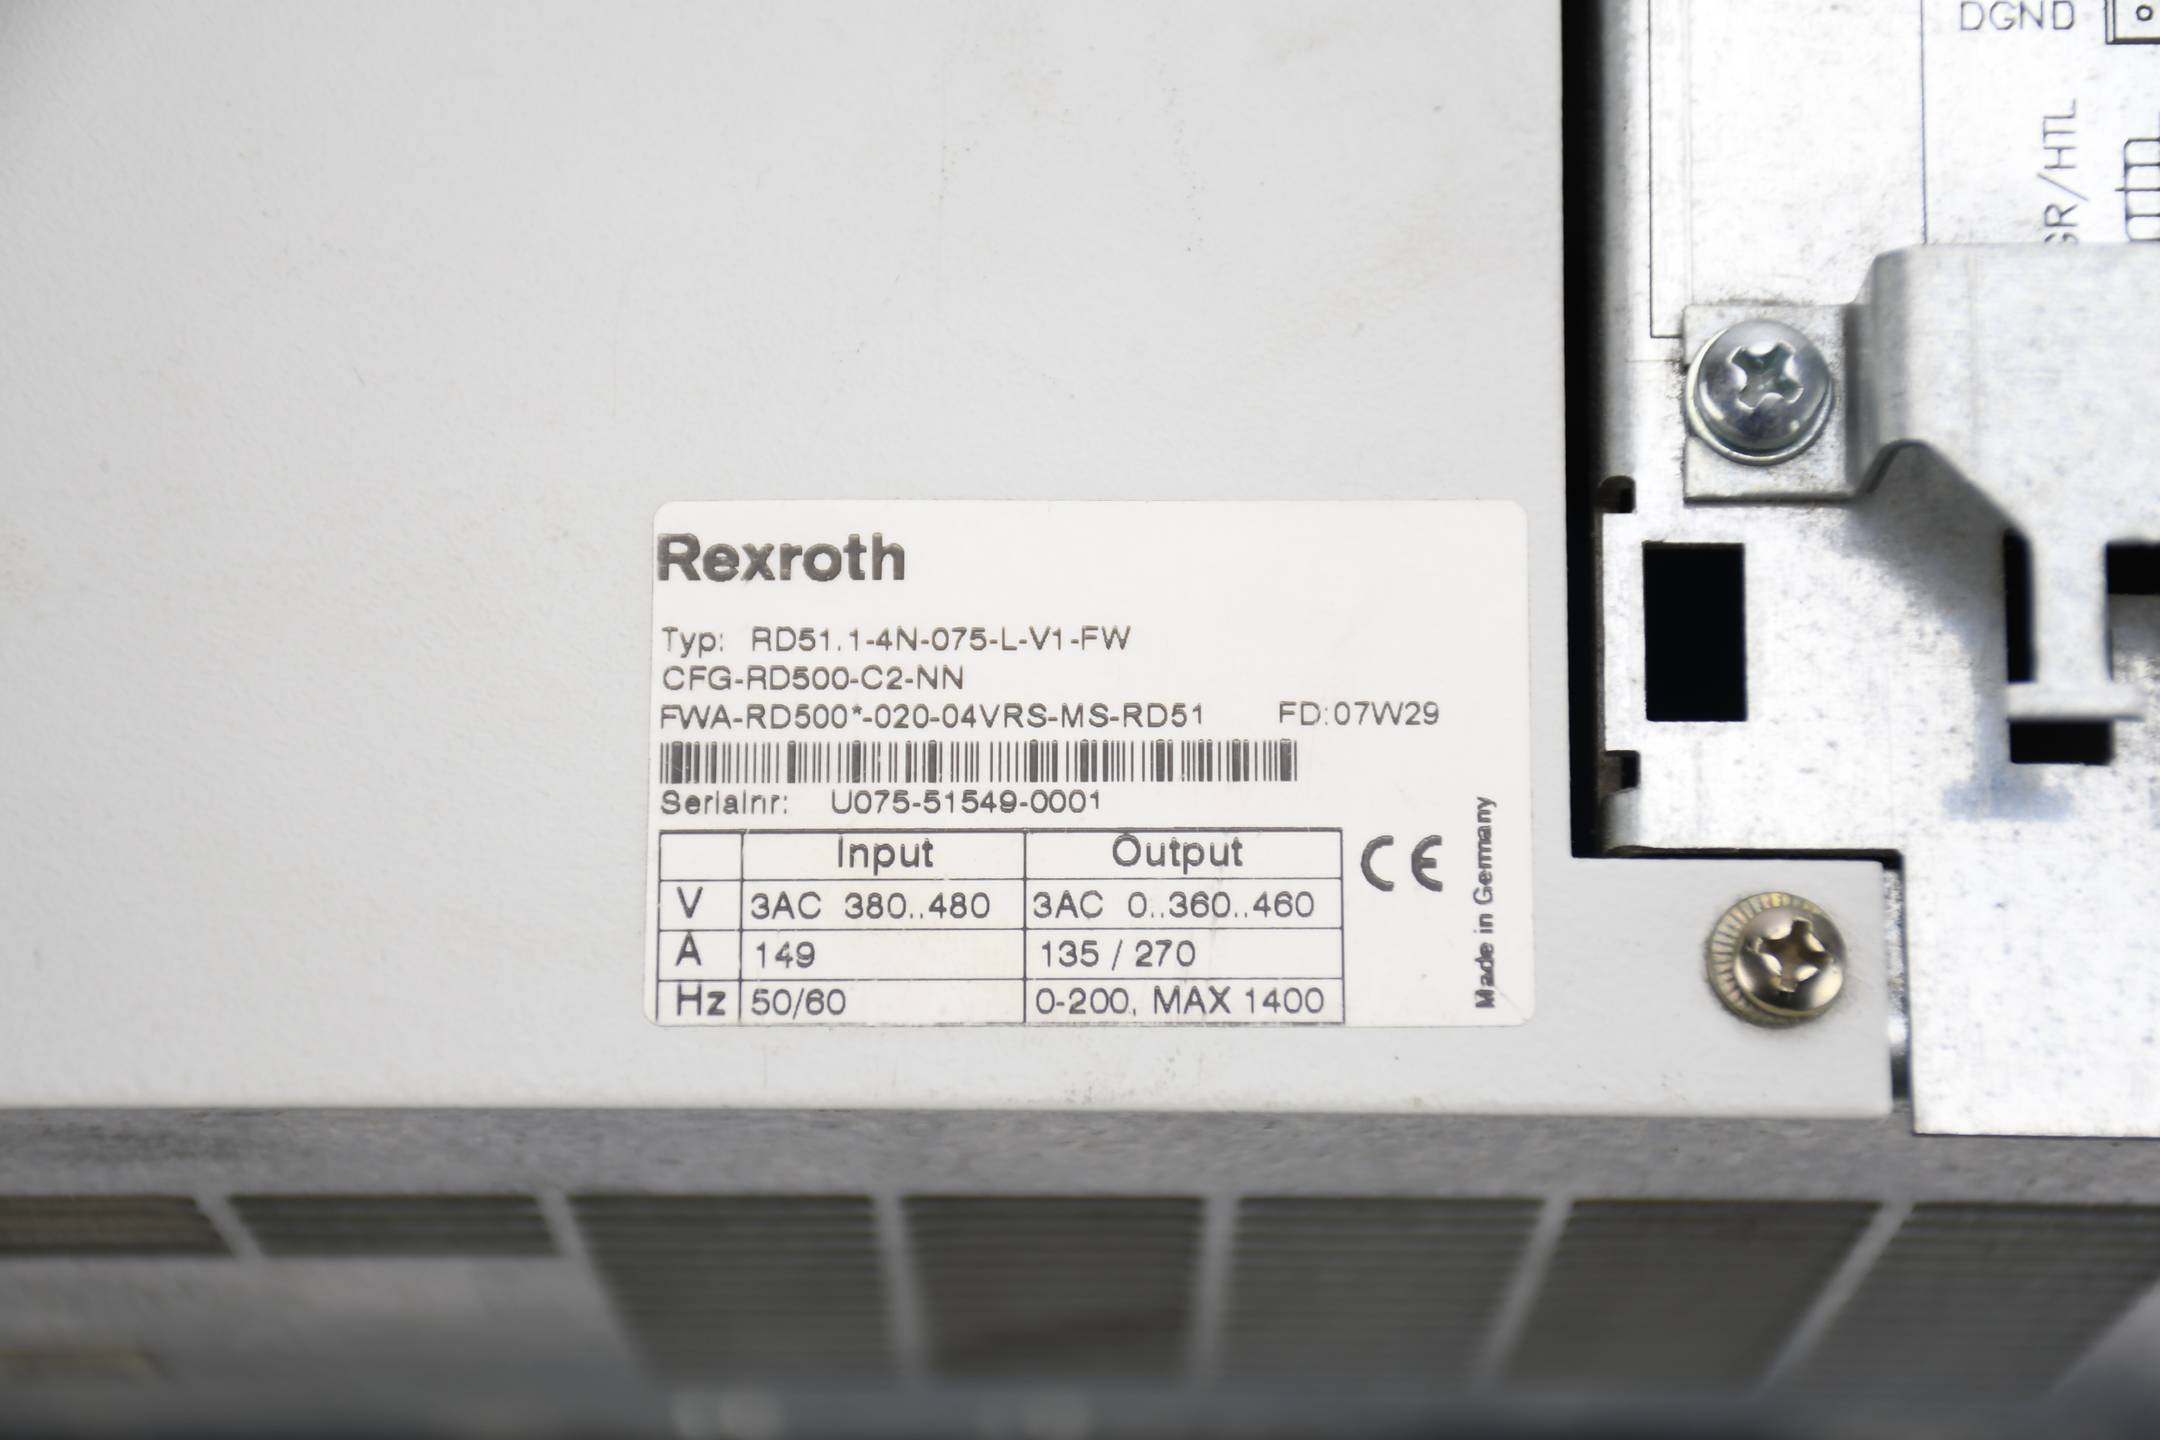 Rexroth Indramat Series Drive Controller RD51.1-4N-075-L-V1-FW RD51 
